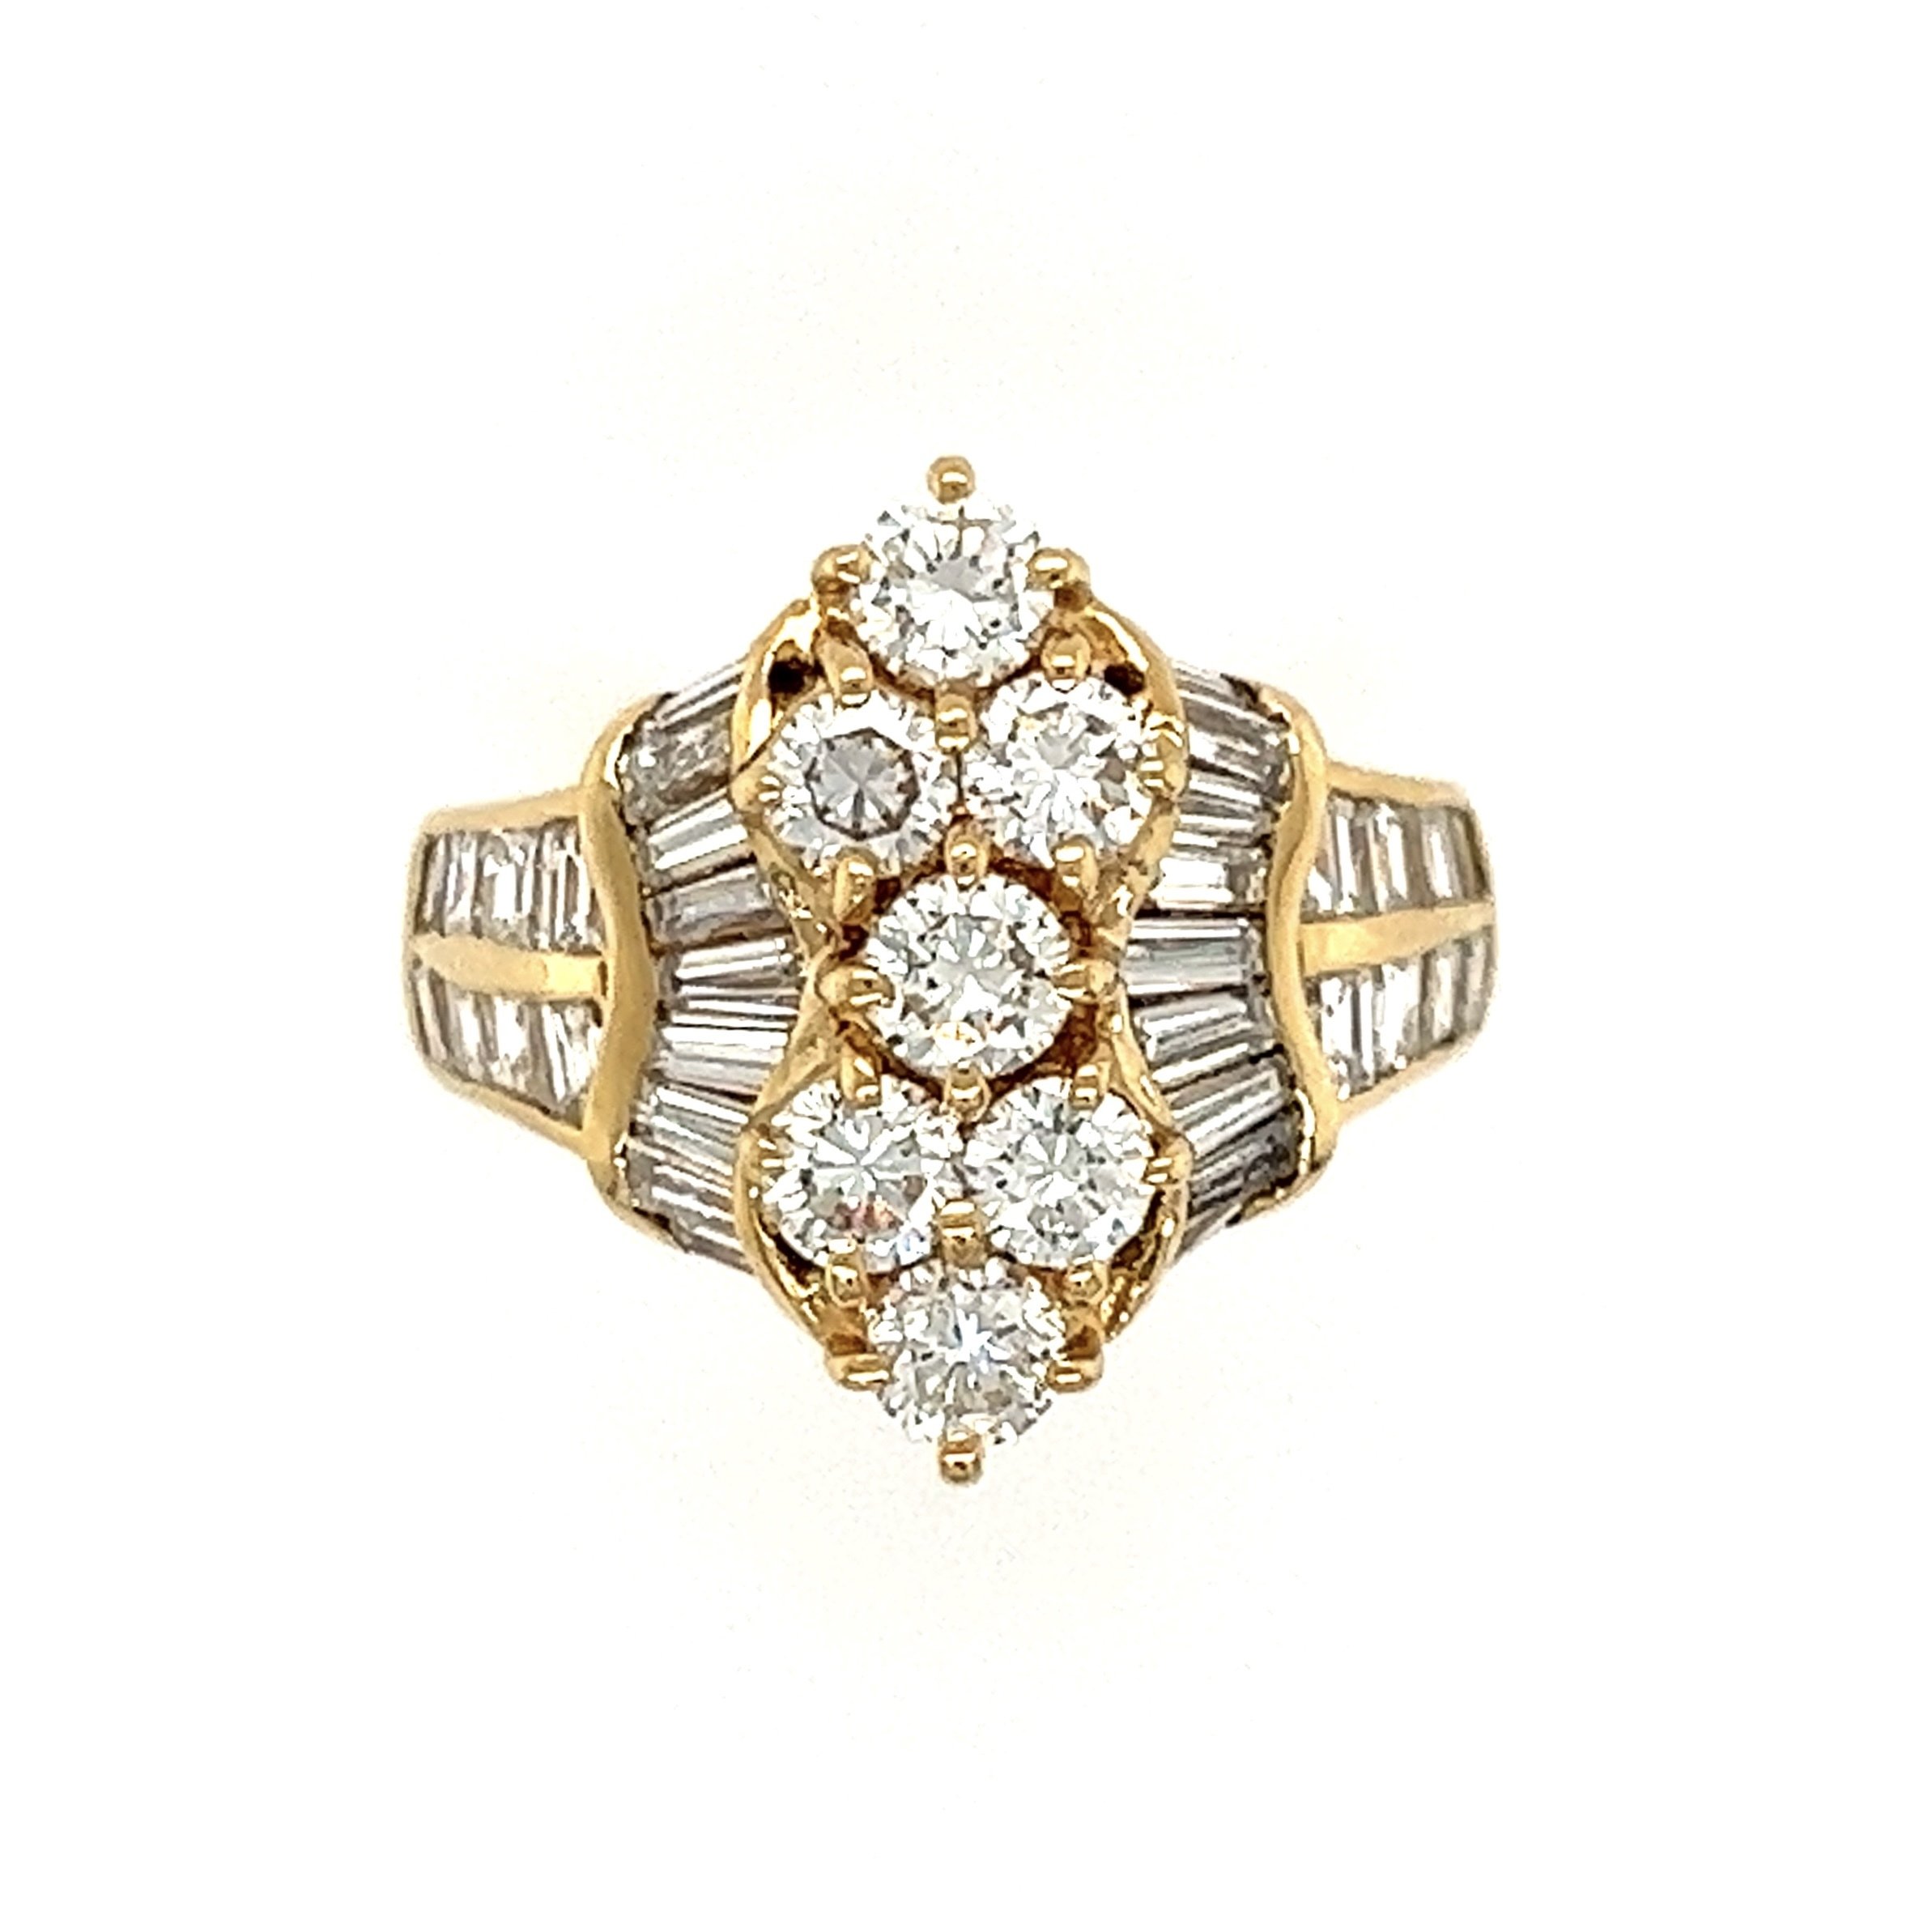 18K YG 2.67tcw Round, Baguette & Square Diamond Cluster Ring 7.6g, s6.5